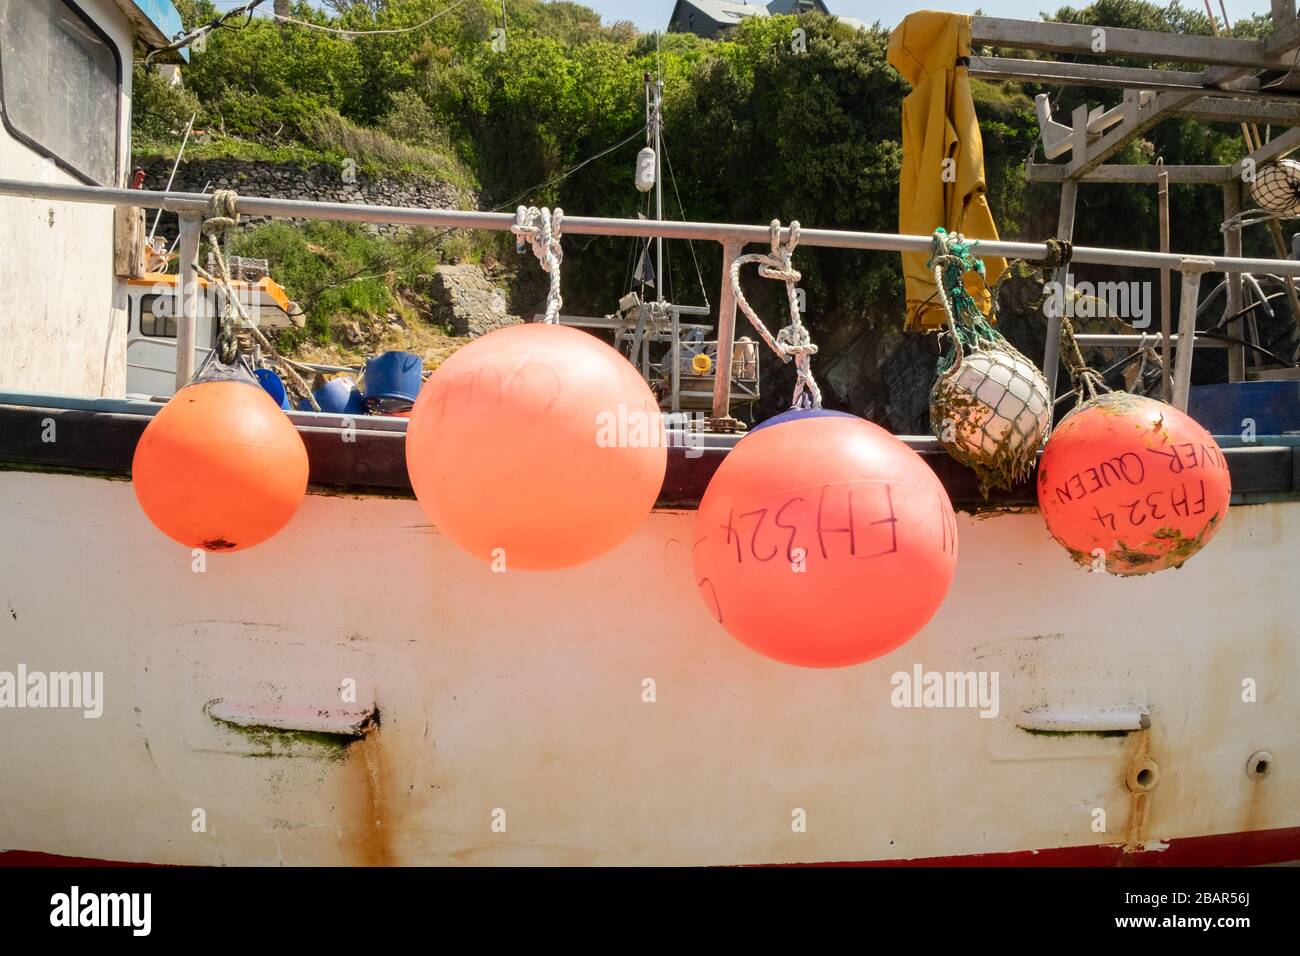 Bright red buoys on traditional fishing boat on the beach of the small fishing village of Cadgwith,Cornwall, England,UK. Stock Photo